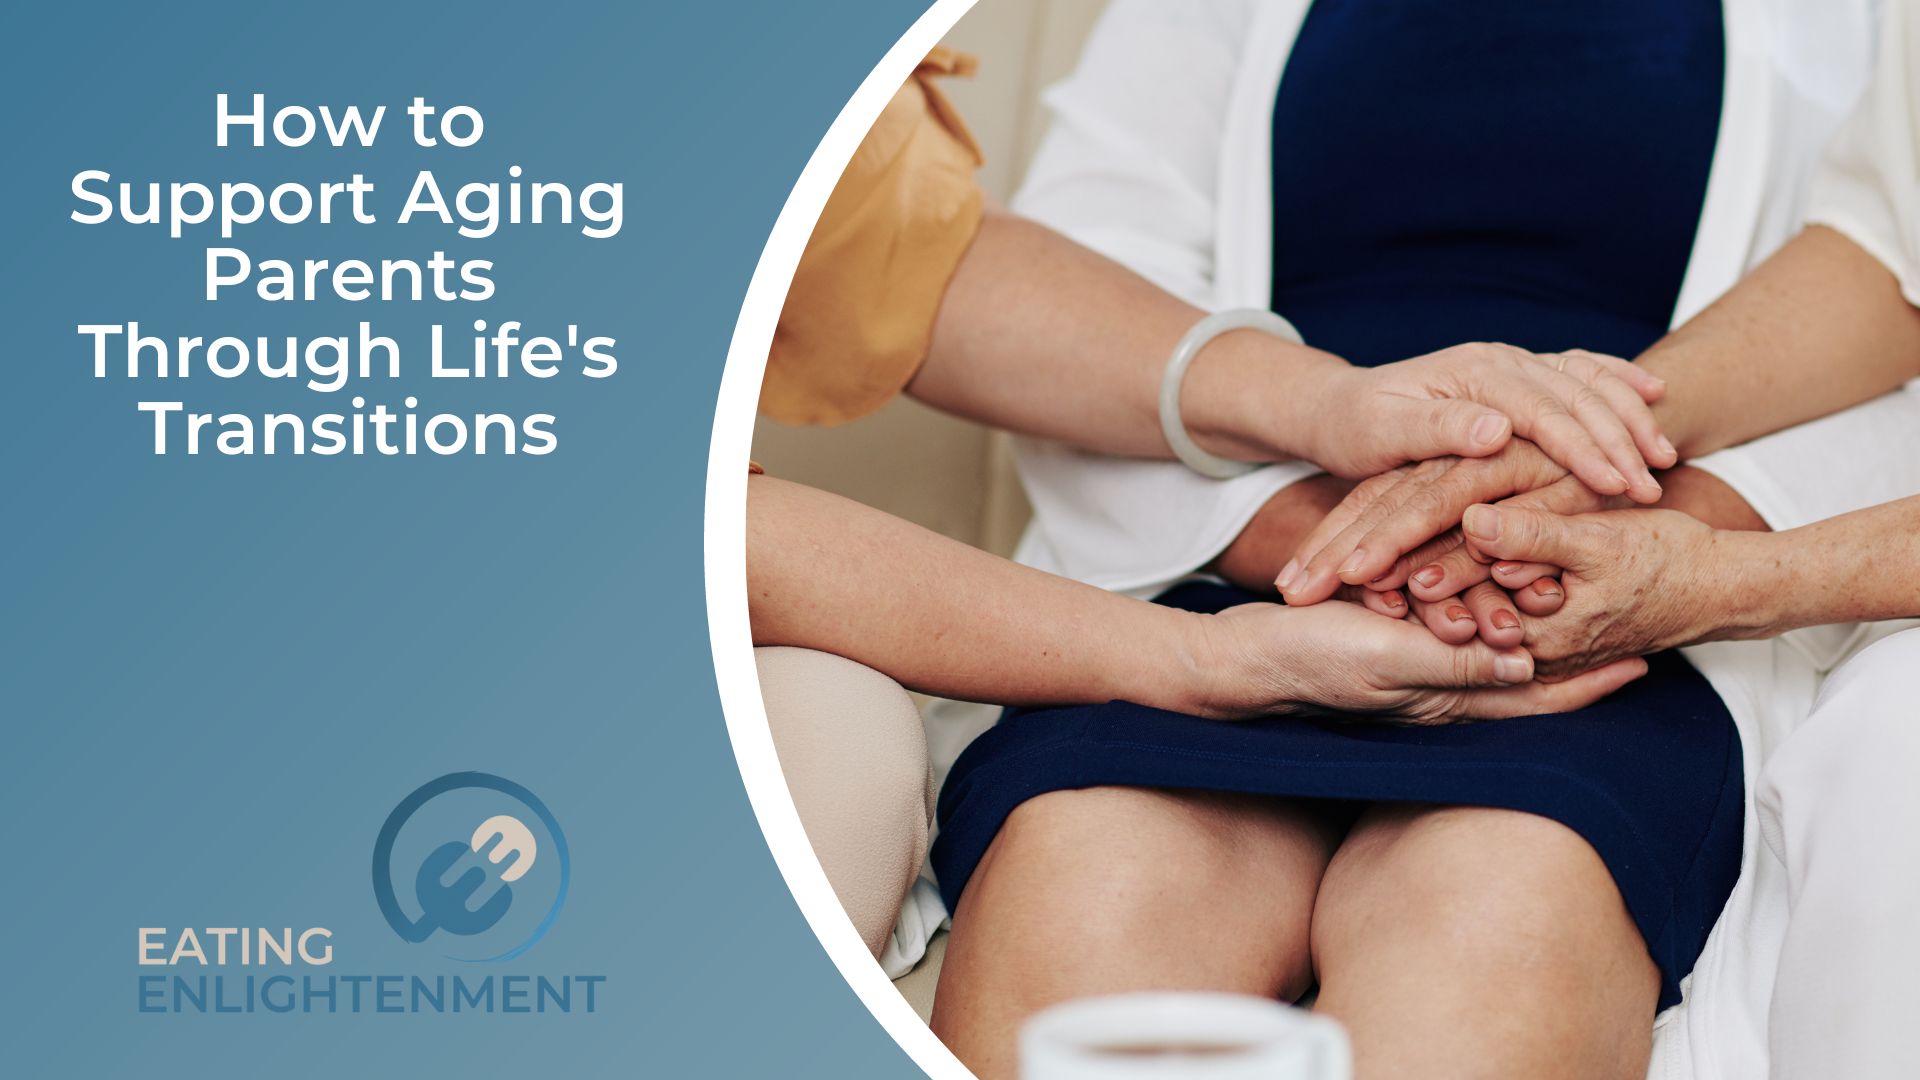 How to Support Aging Parents Through Life's Transitions